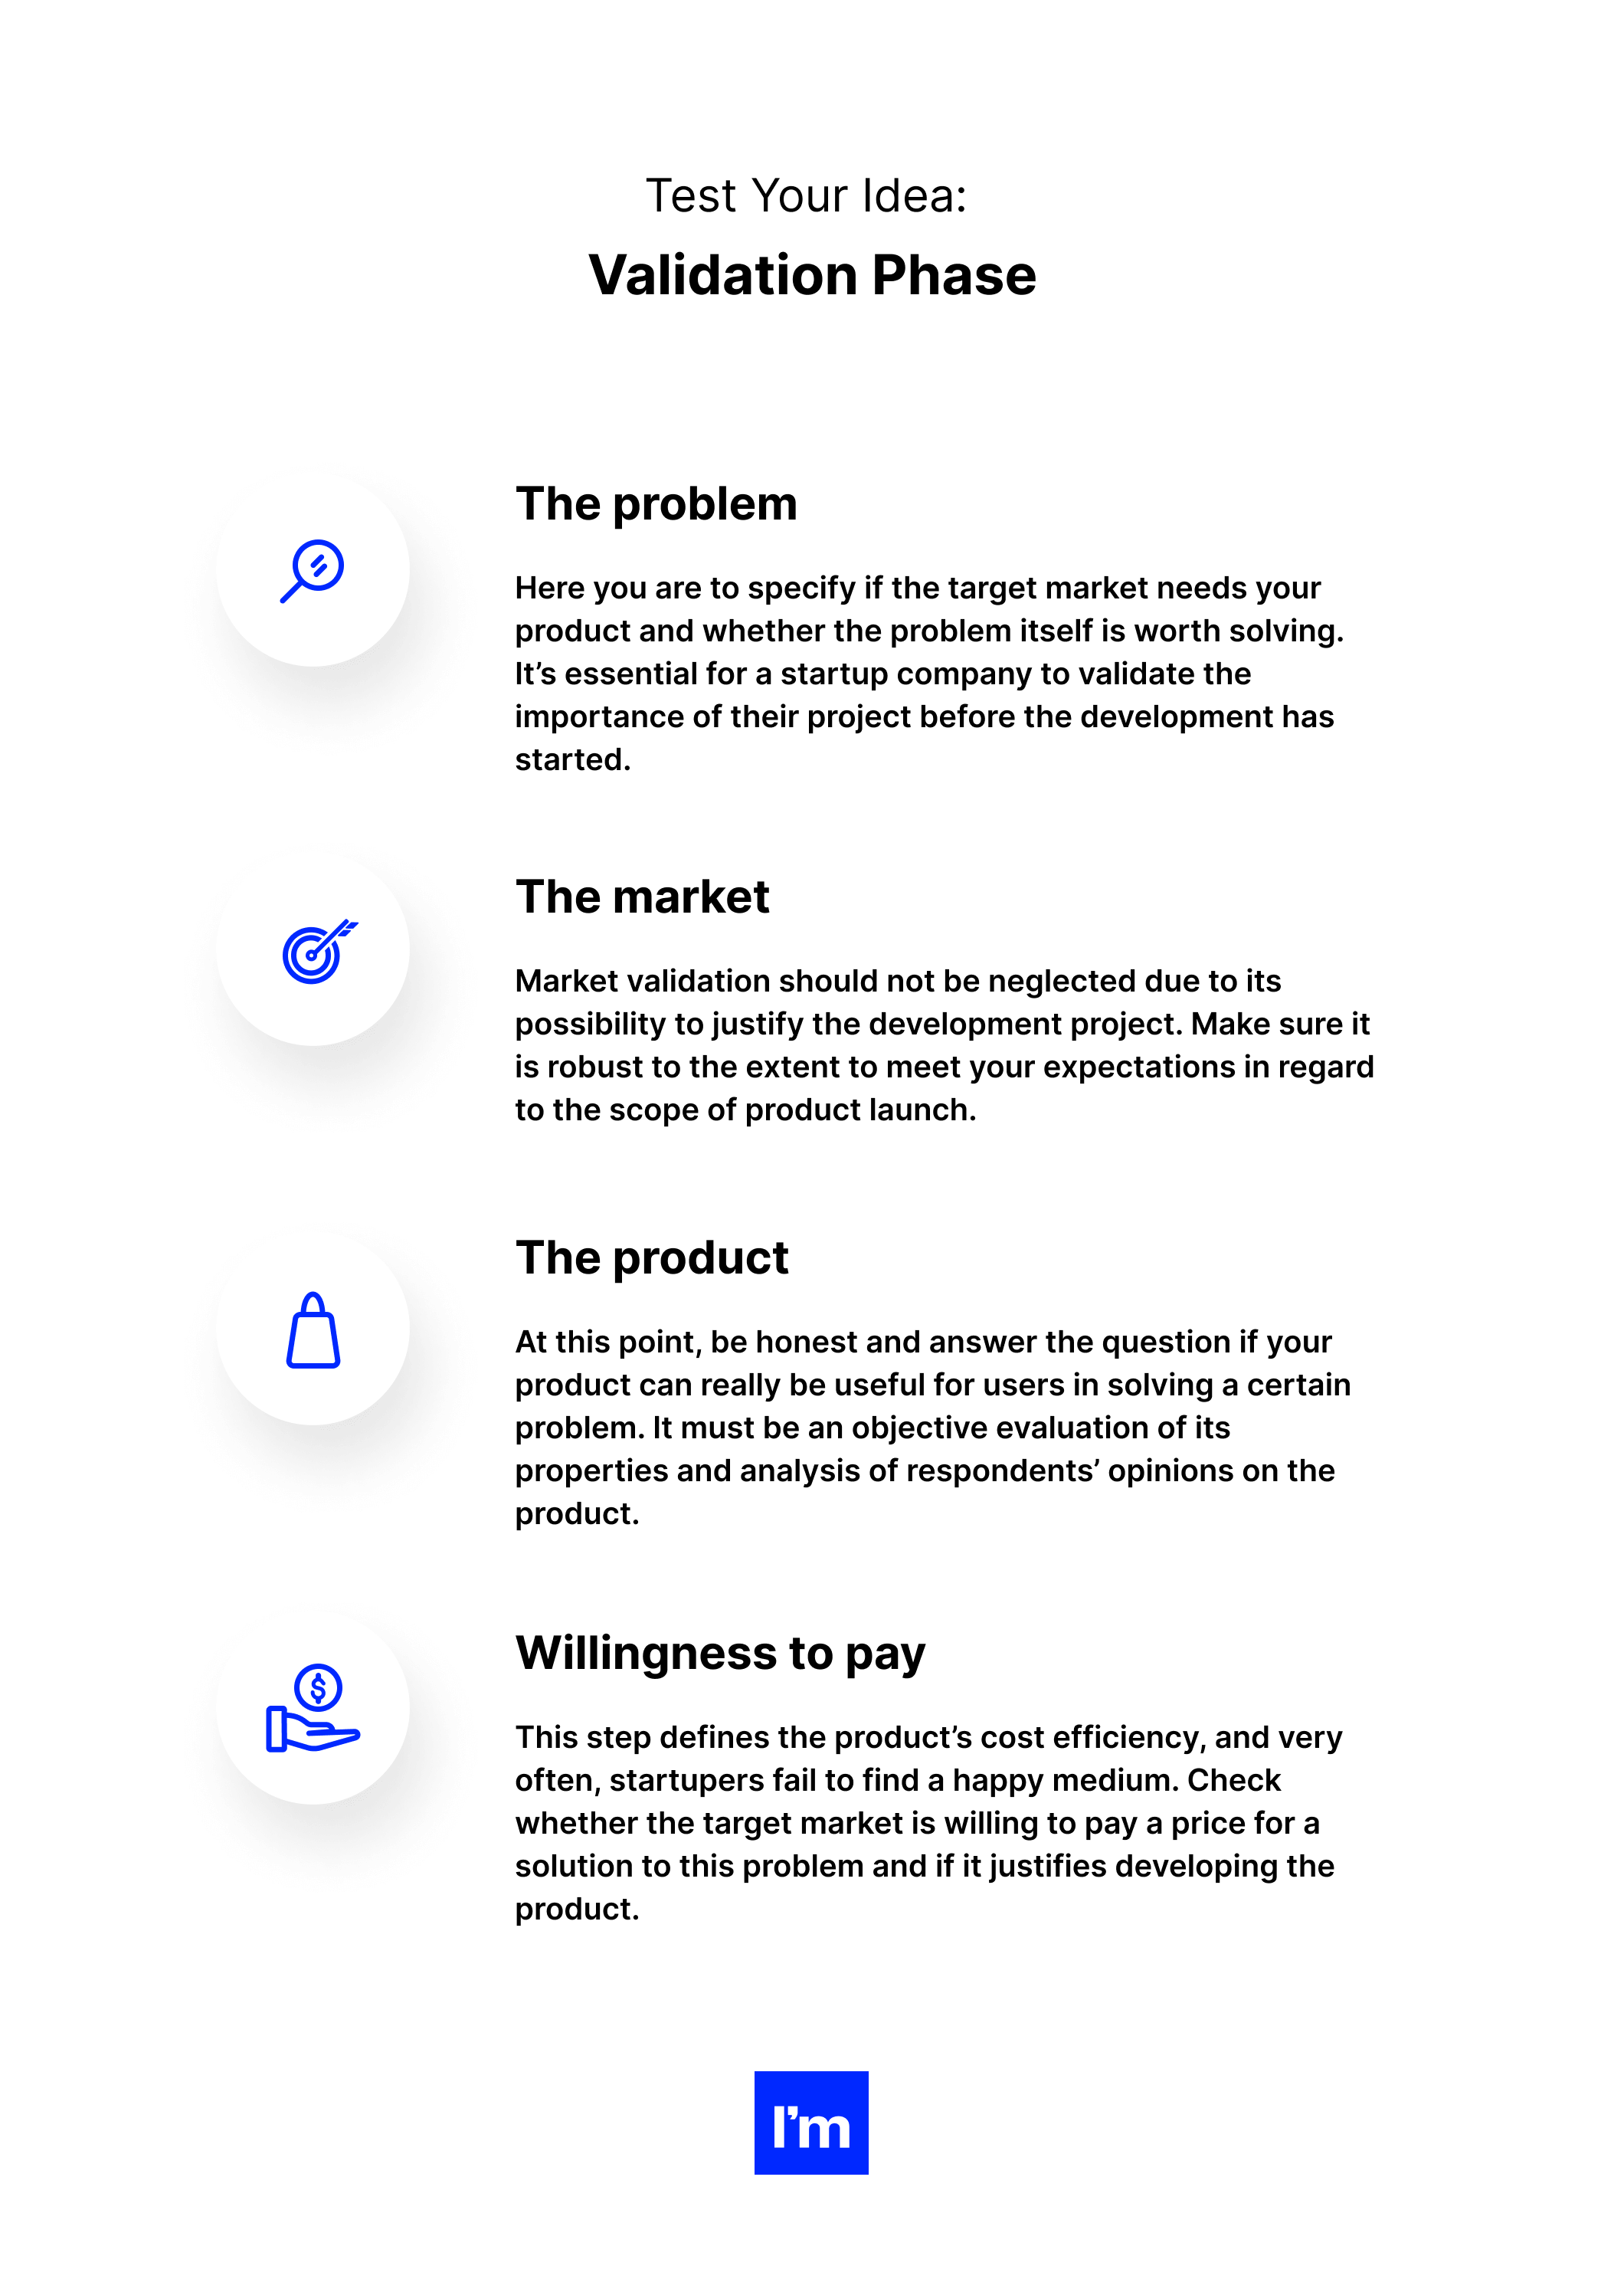 infographic 3 - Test Your Idea_ Validation Phase